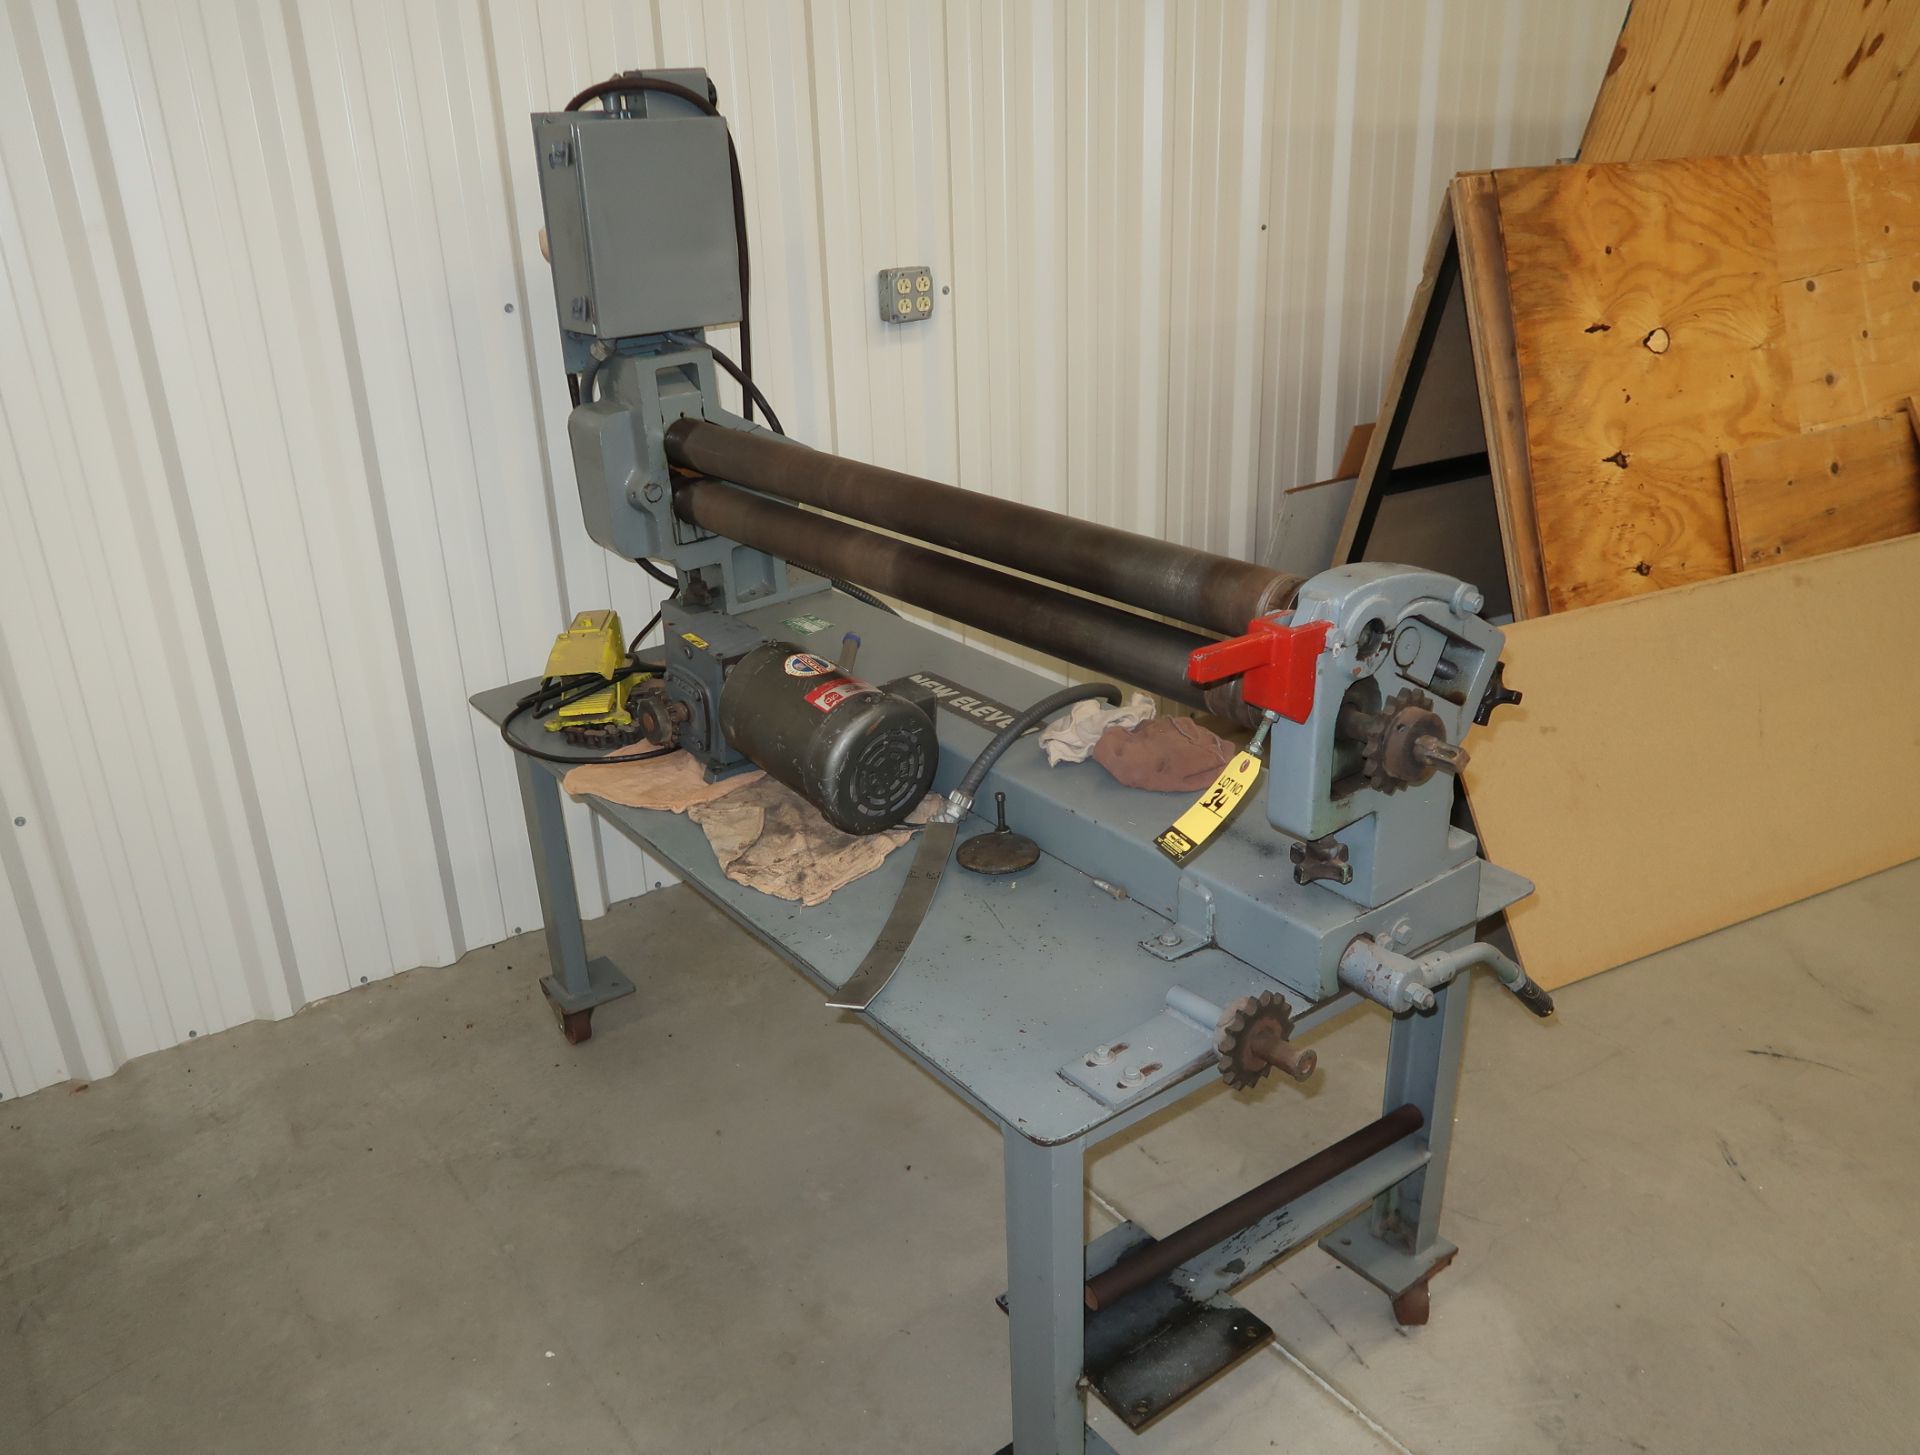 NEEI 4' X 16GA POWER ROLL, MDL. SR-1270, SN. 35, (DRIVE MOTOR REMOVED) - Image 2 of 2